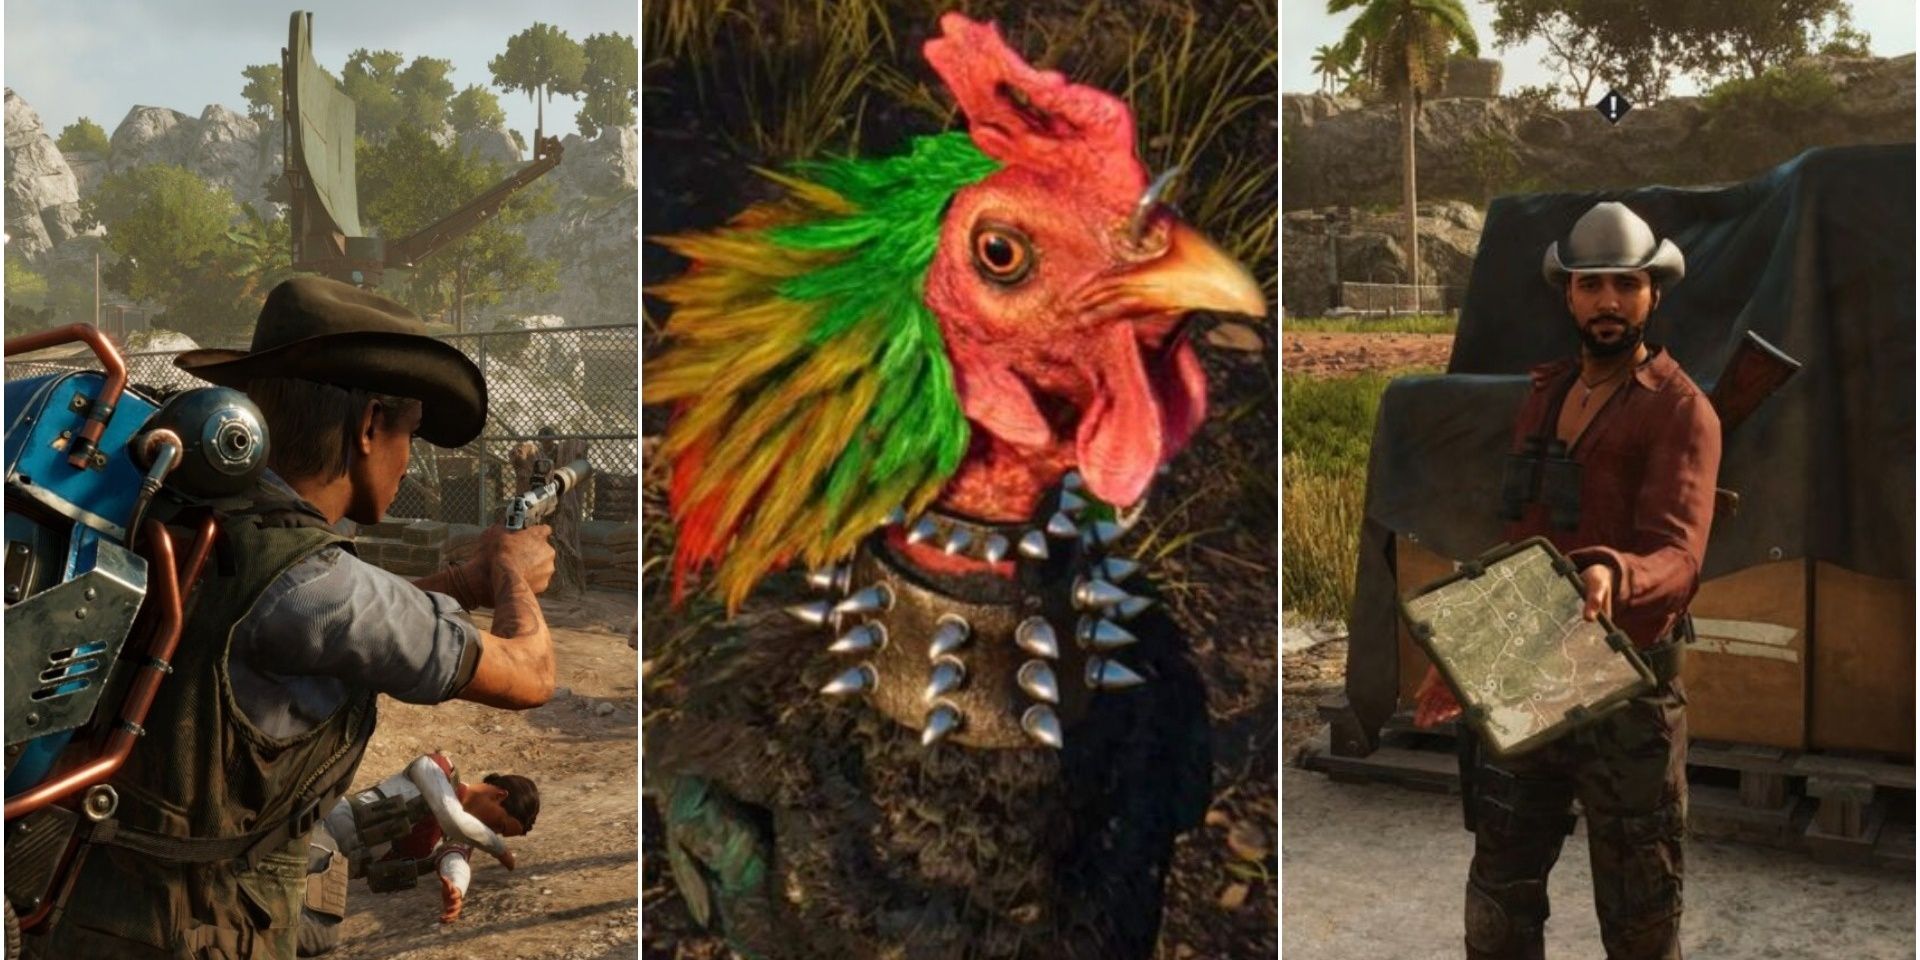 far cry 6 things to do after beat game feat dani, chicharron, and guerrilla